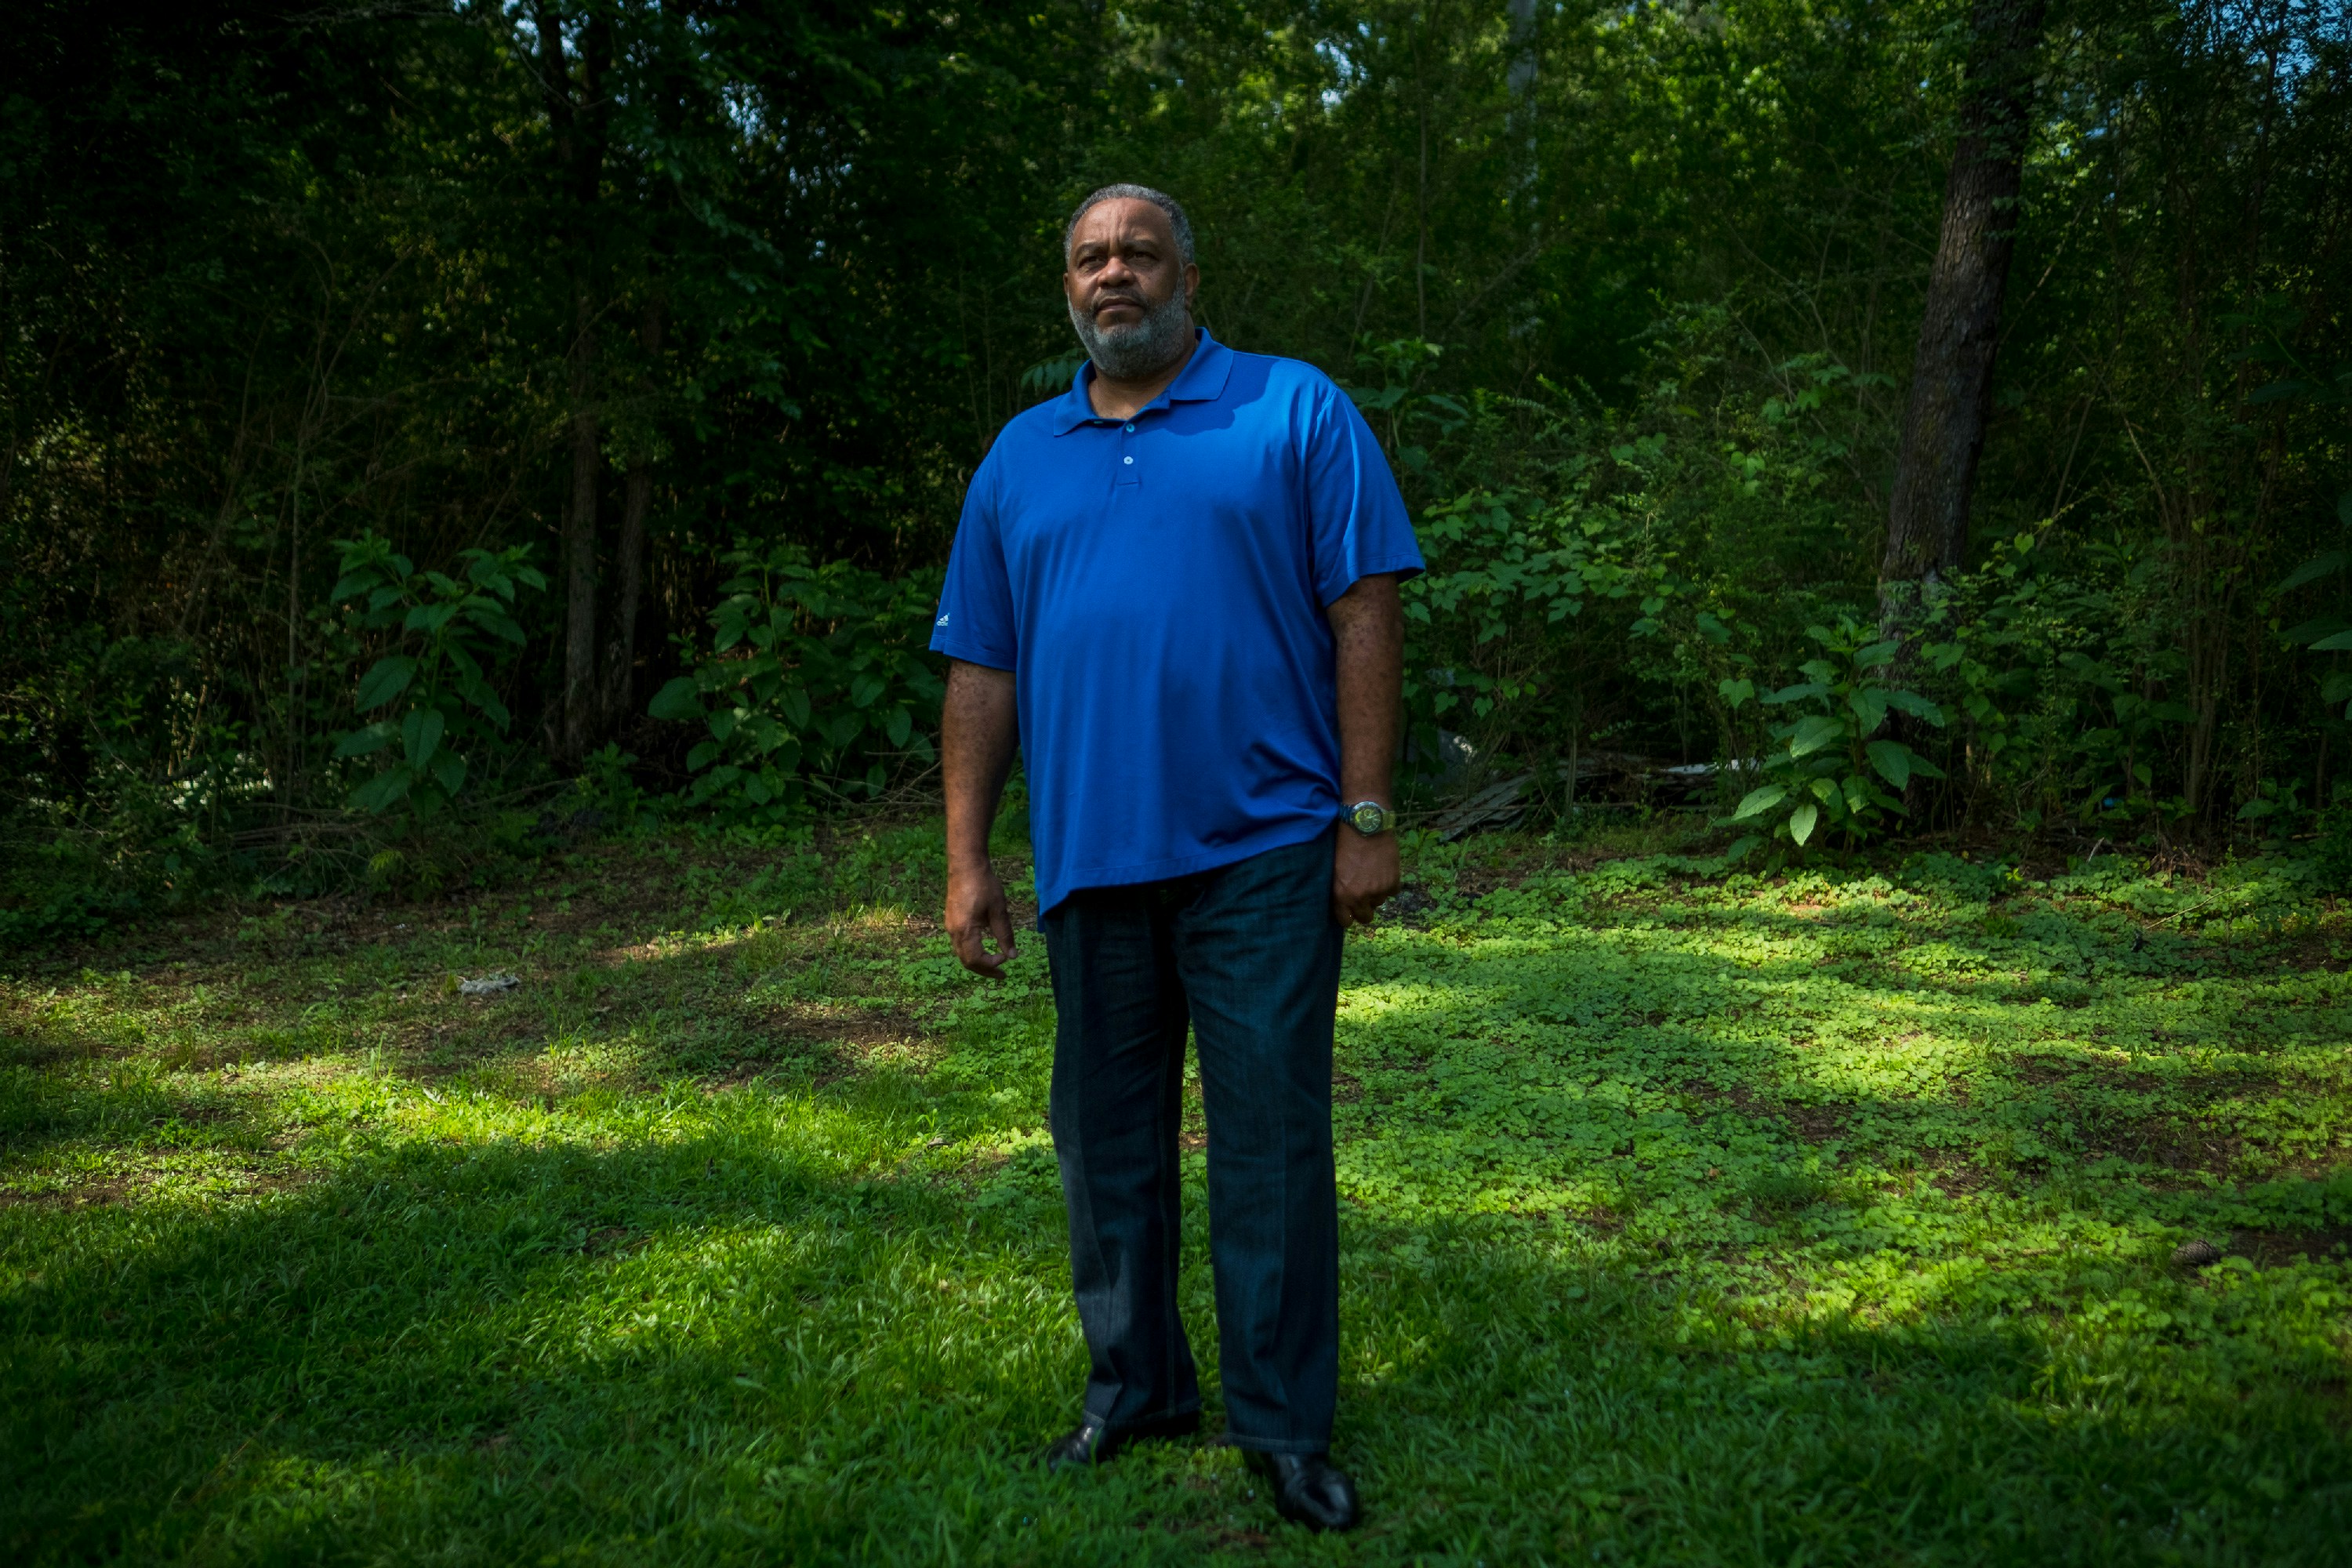 Anthony Ray Hinton stands near the spot in the yard of his home in Quinton, Alabama, Sunday, June 3, 2018, where Alabama police officers came to arrest him for crimes he didn't commit in 1985. When he is not traveling, Hinton says he spends a lot of time outdoors. "It just gives me a sense of belonging. When one has been locked up, the last place I want to be is stuck in the house. I love the outdoors." Hinton spent 30 years on death row after he was wrongfully incarcerated for two murders he did not commit. His recently released his memoir, "The Sun Does Shine: How I Found Life and Freedom on Death Row.”<br /> (Tamika Moore for The Intercept)”></a> </p>
<p class=